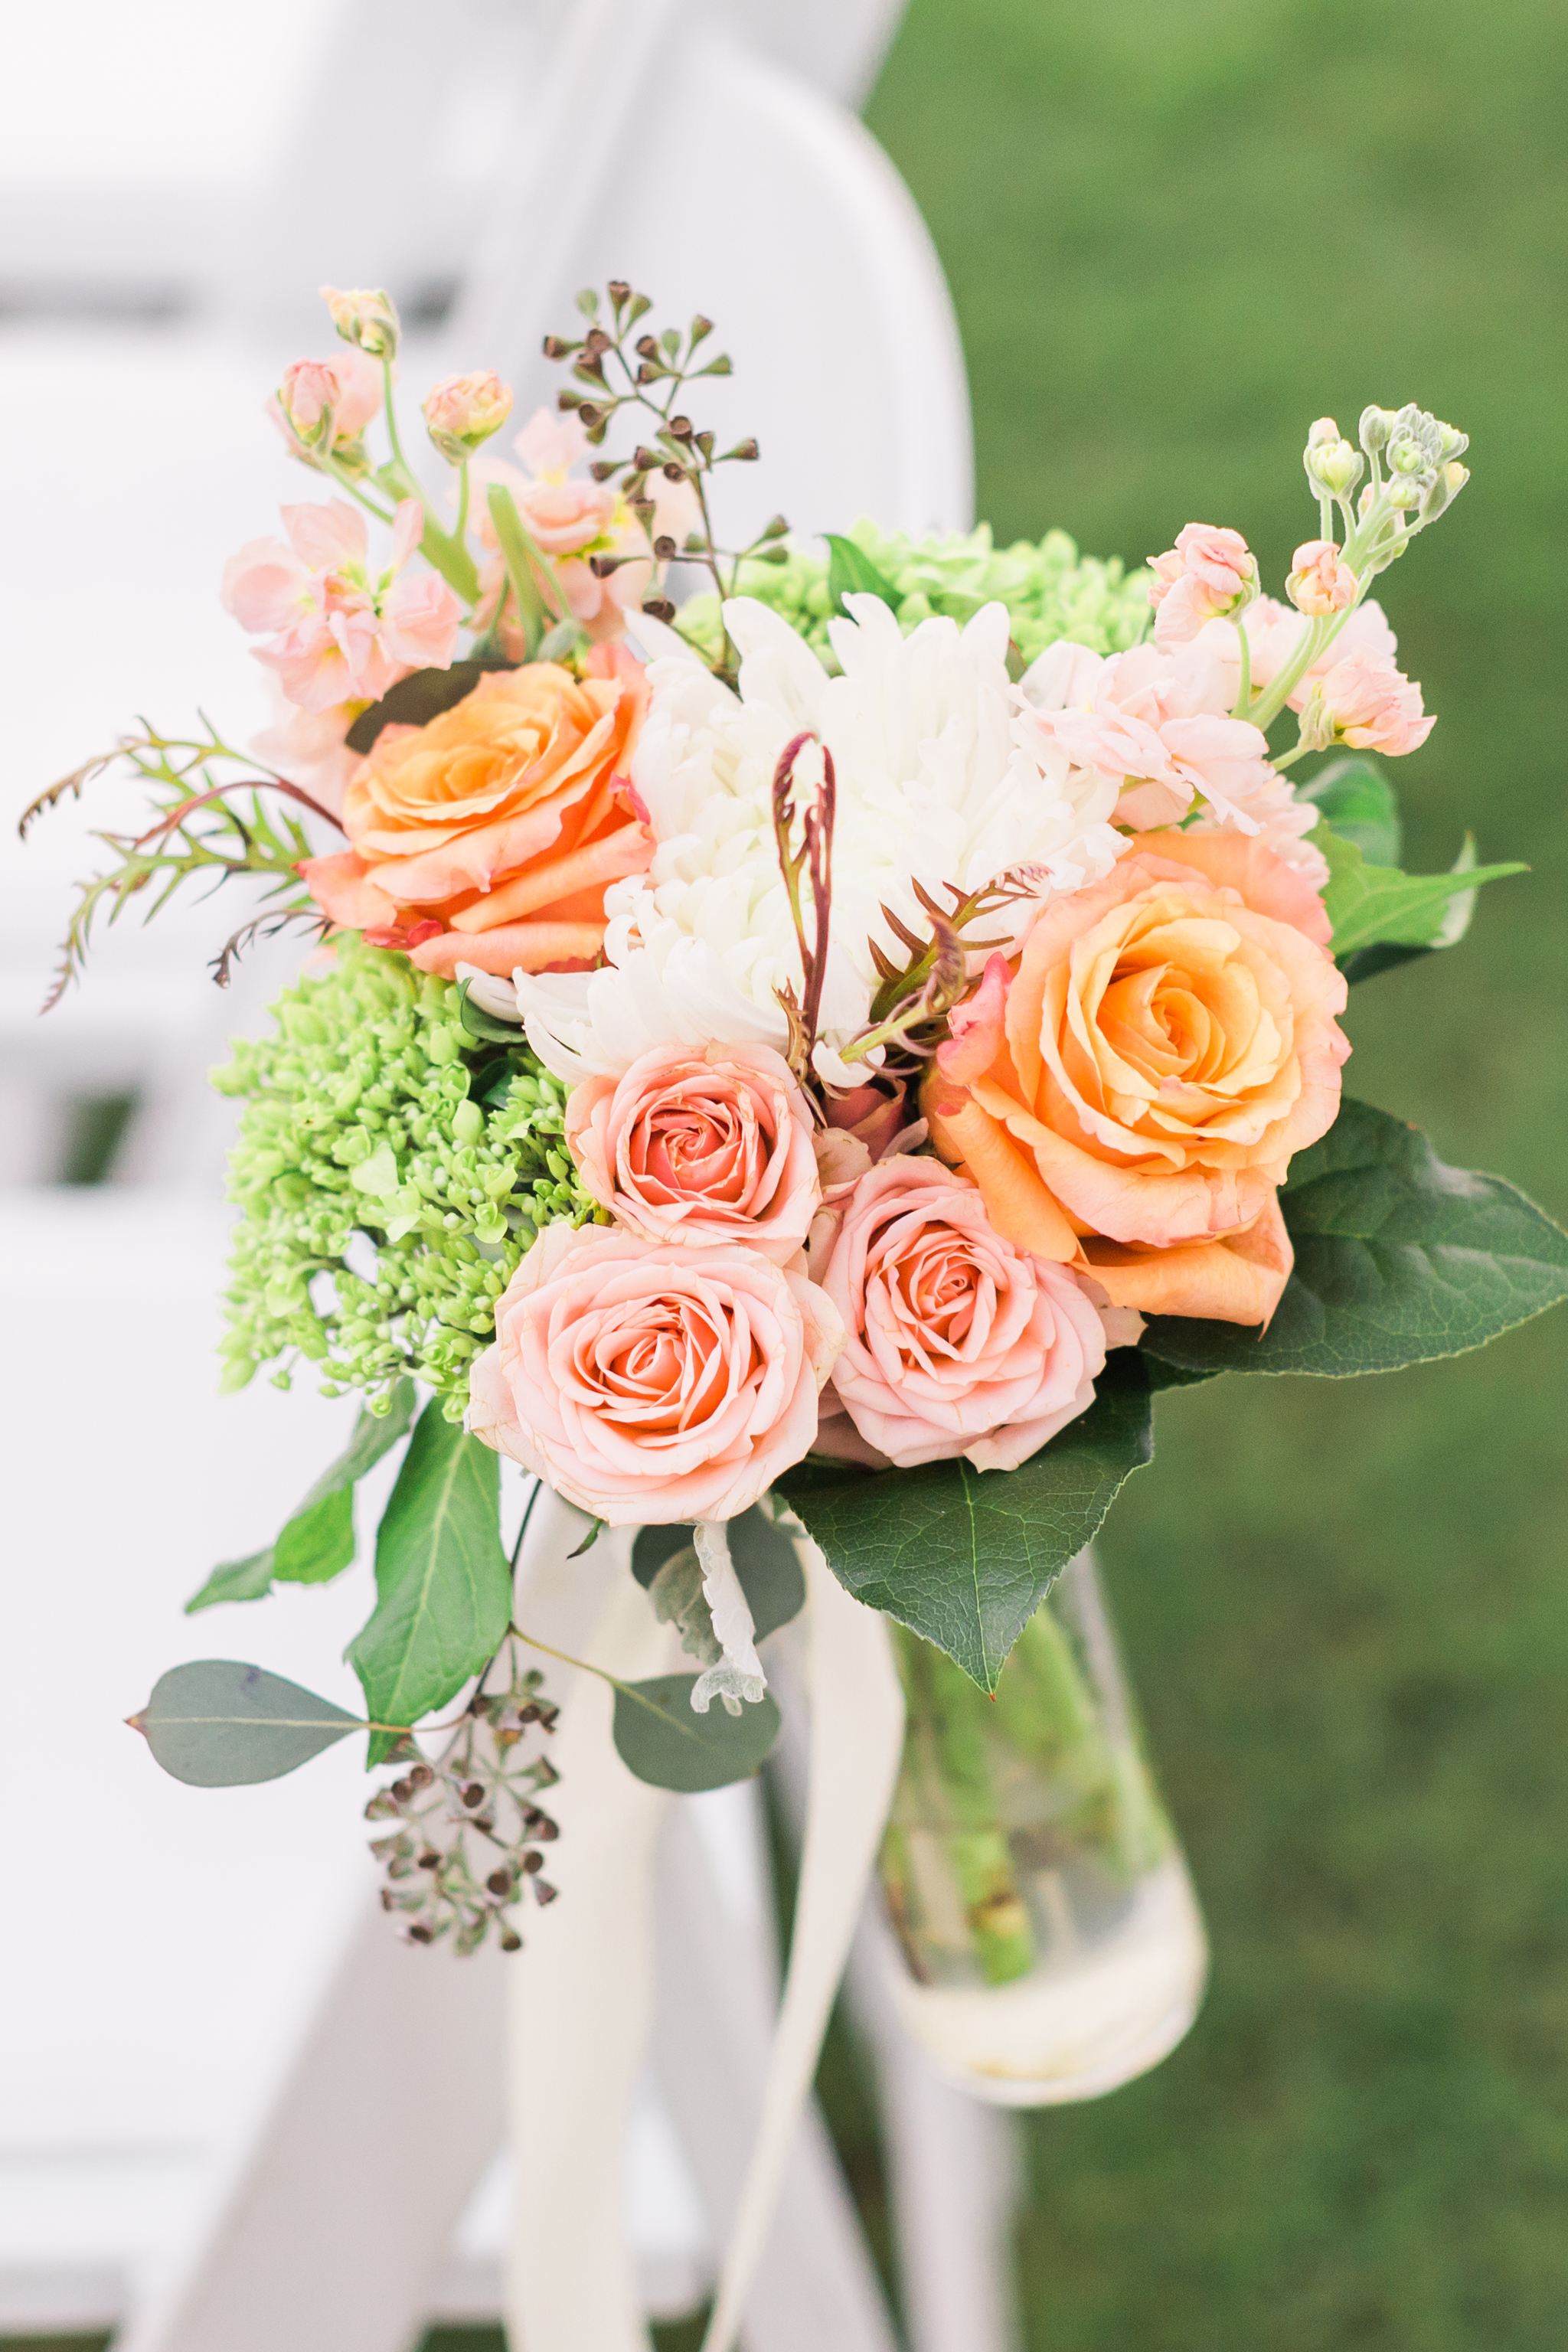 These aisle flowers were perfect for this outdoor Spring wedding!